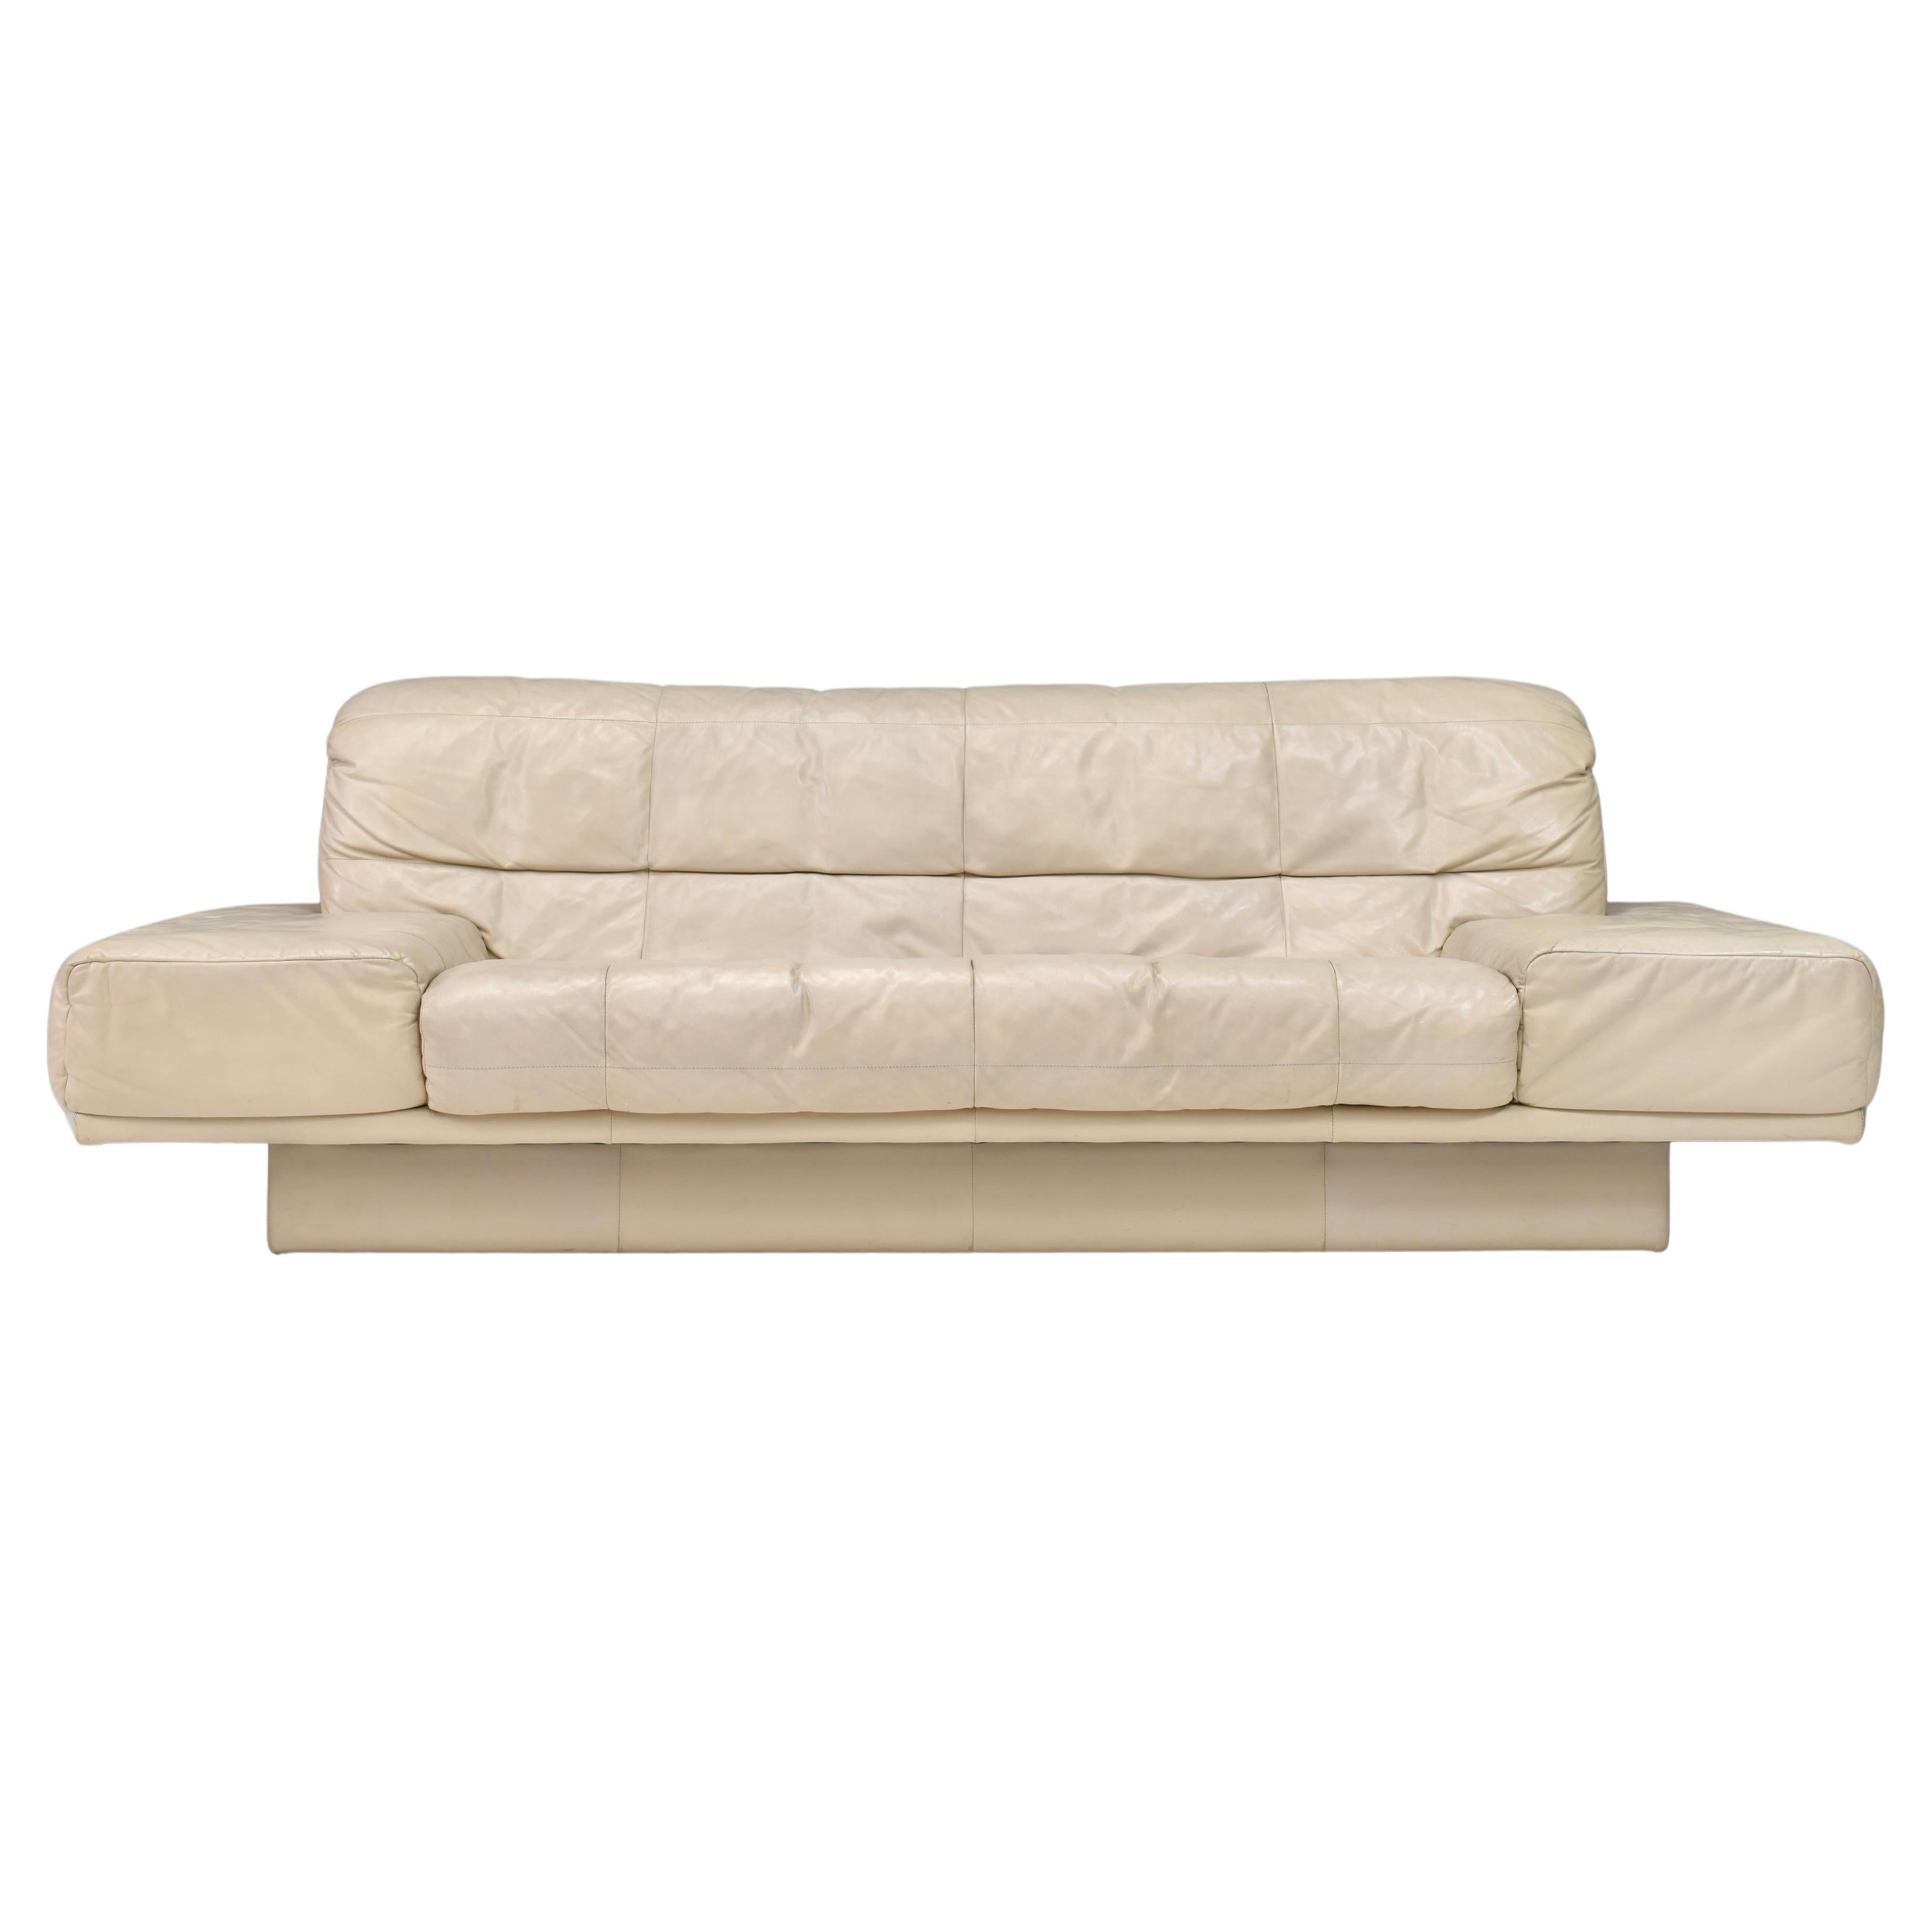 Rolf Benz 3-seat sofa in Ivory Cream Leather – Germany, circa 1980-1990